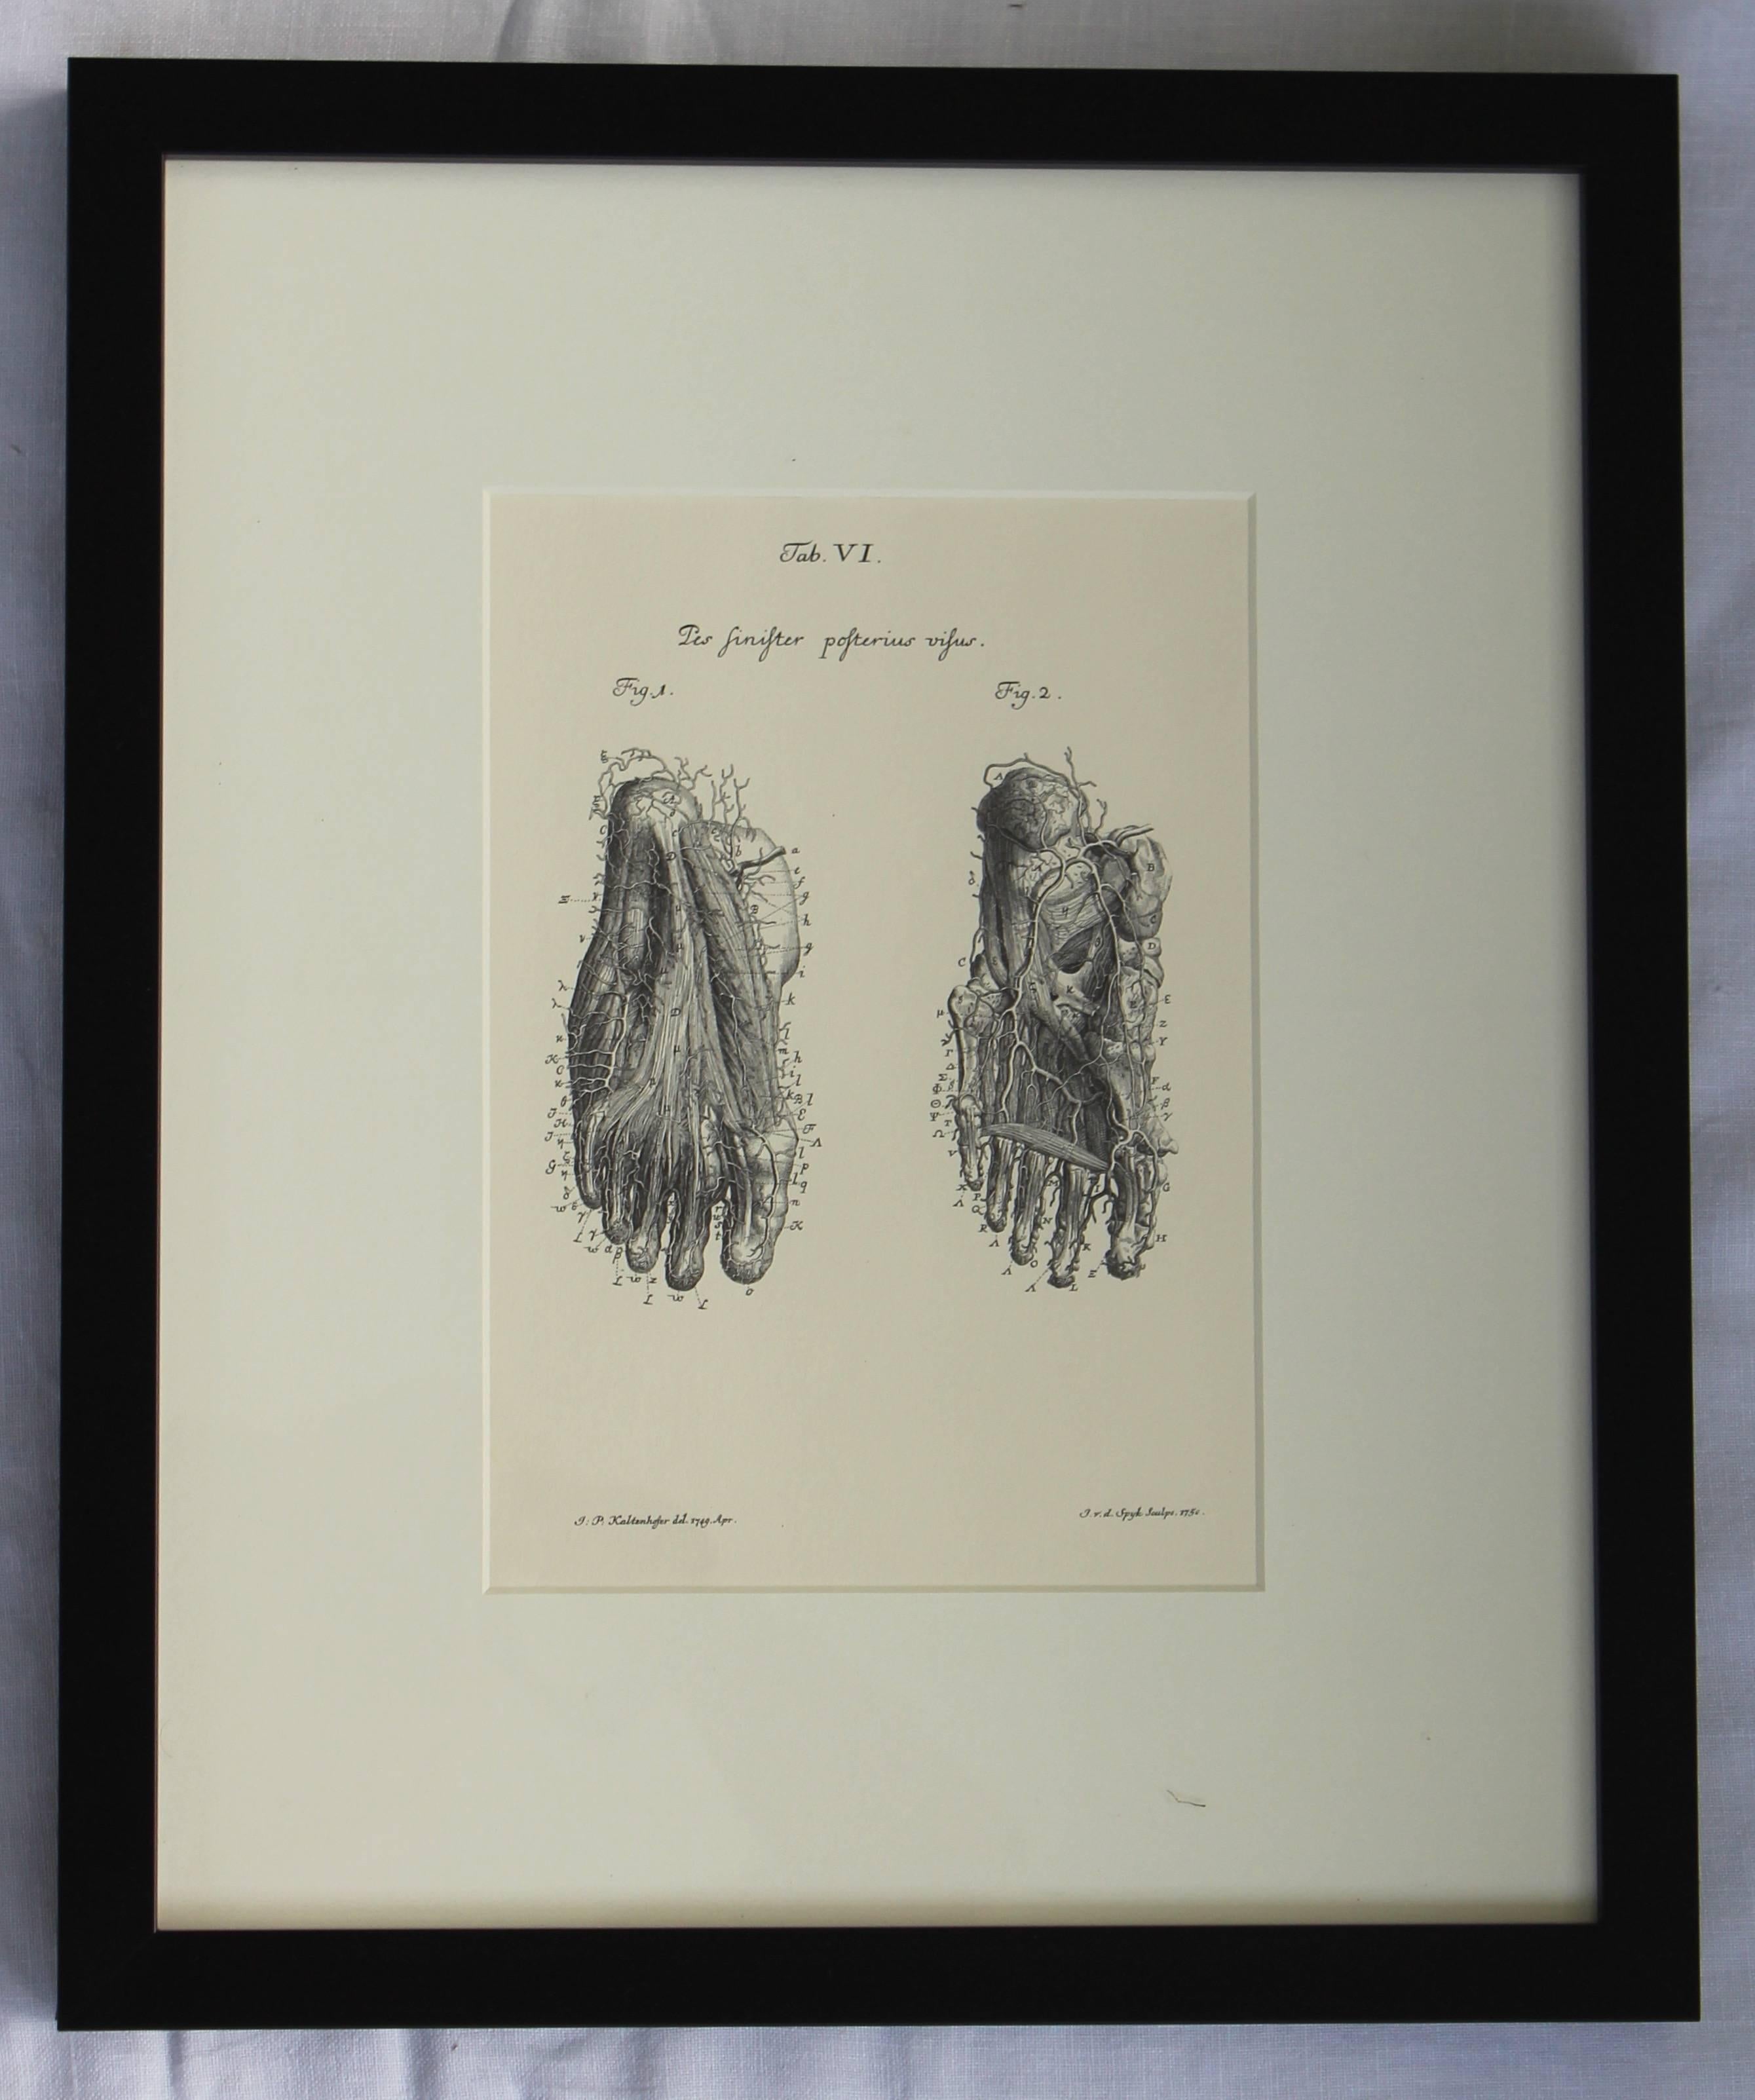 Set of eight anatomical lithographs after Albrecht Von Haller. 

Published by Ashford Press, Sols Point, Clinton, CT.
Printed by the Meridan Gravure, Meridan, CT, April, 1982.
Plates reproduced by the courtesy of the Historical Library, Yale School